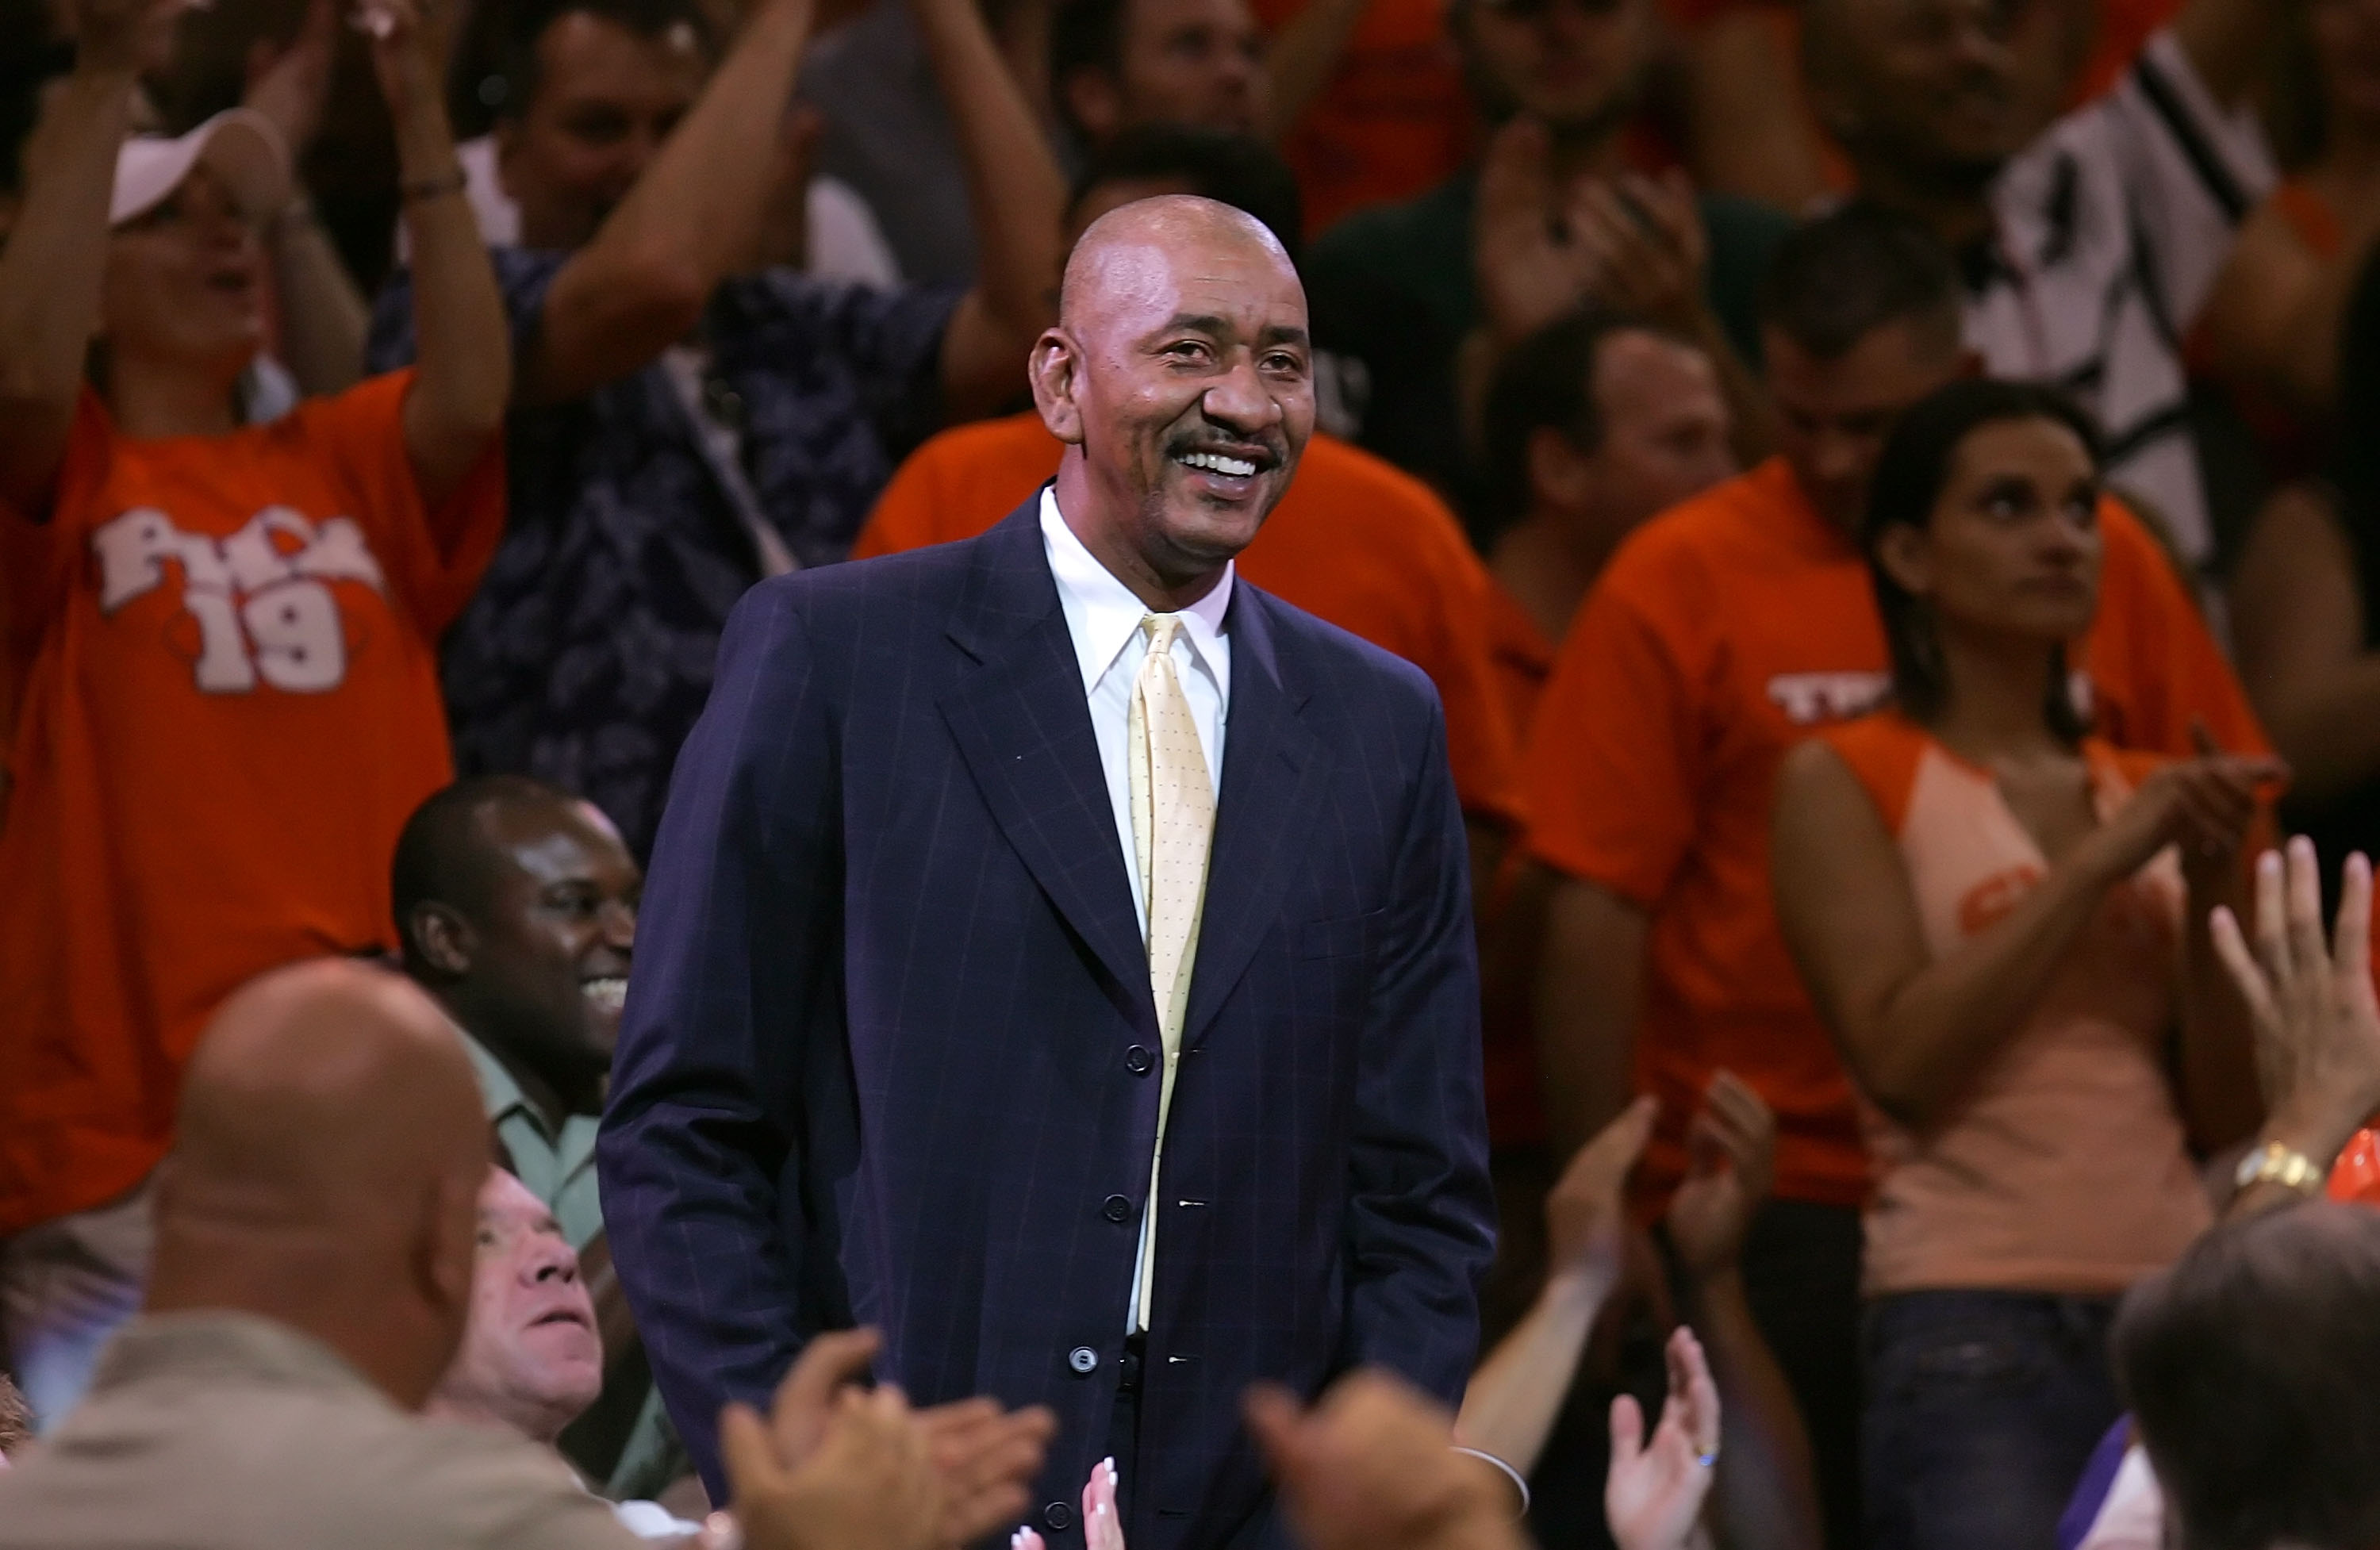 PHOENIX - JUNE 03:  NBA Legend George Gervin watches the Dallas Mavericks take on the Phoenix Suns in game six of the Western Conference Finals during the 2006 NBA Playoffs on June 3, 2006 at US Airways Center in Phoenix, Arizona.  The Mavericks won 102-9